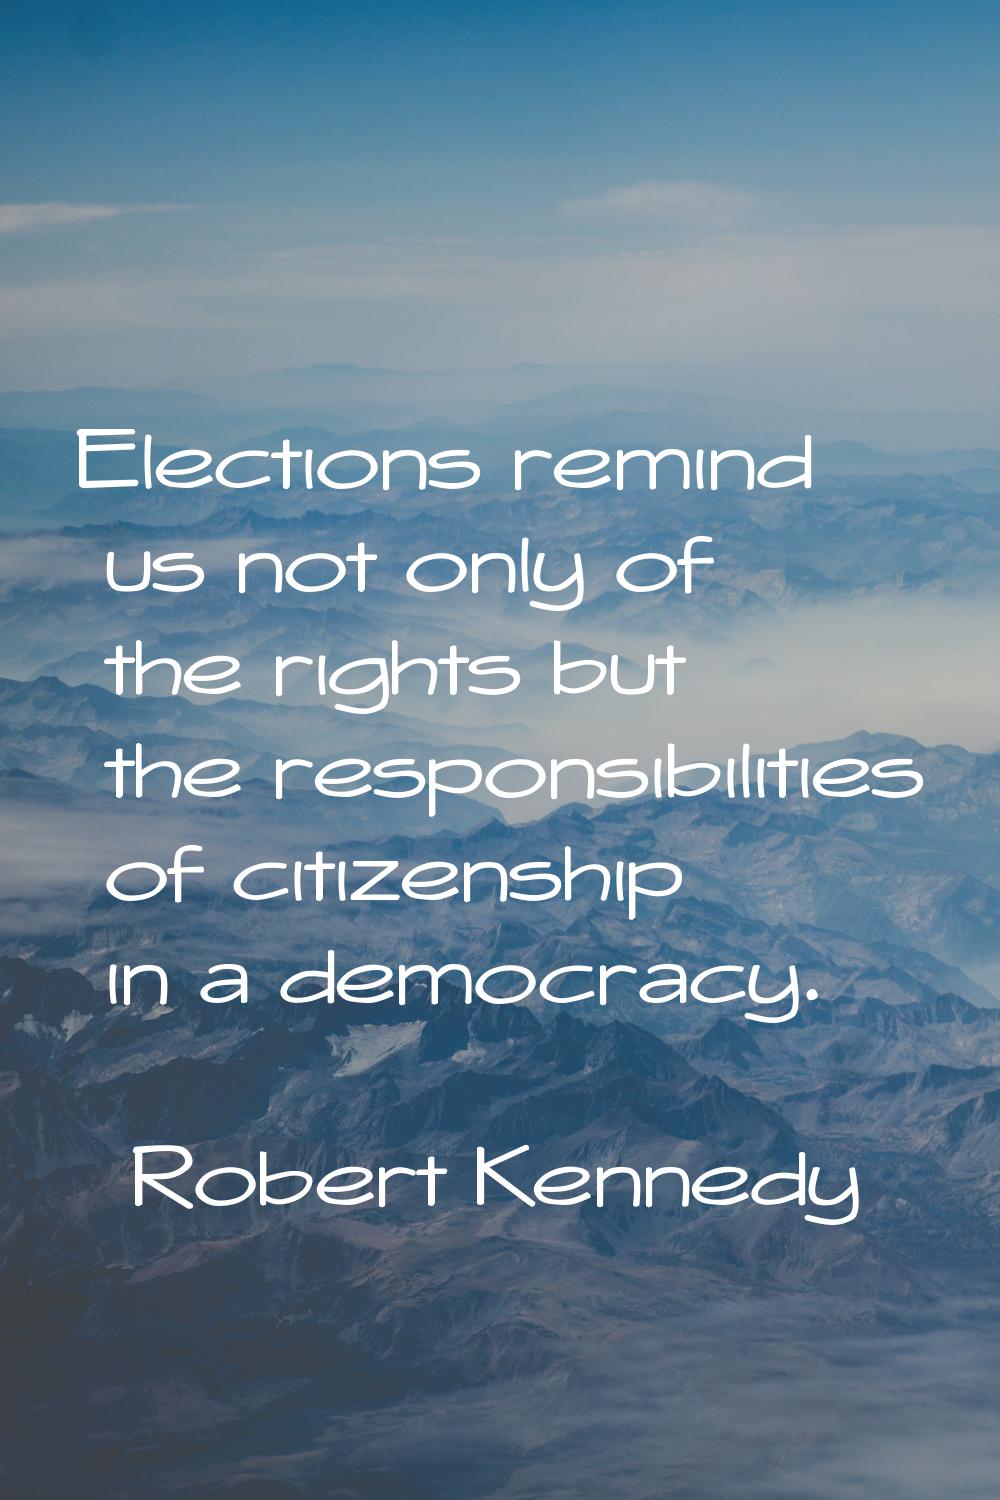 Elections remind us not only of the rights but the responsibilities of citizenship in a democracy.